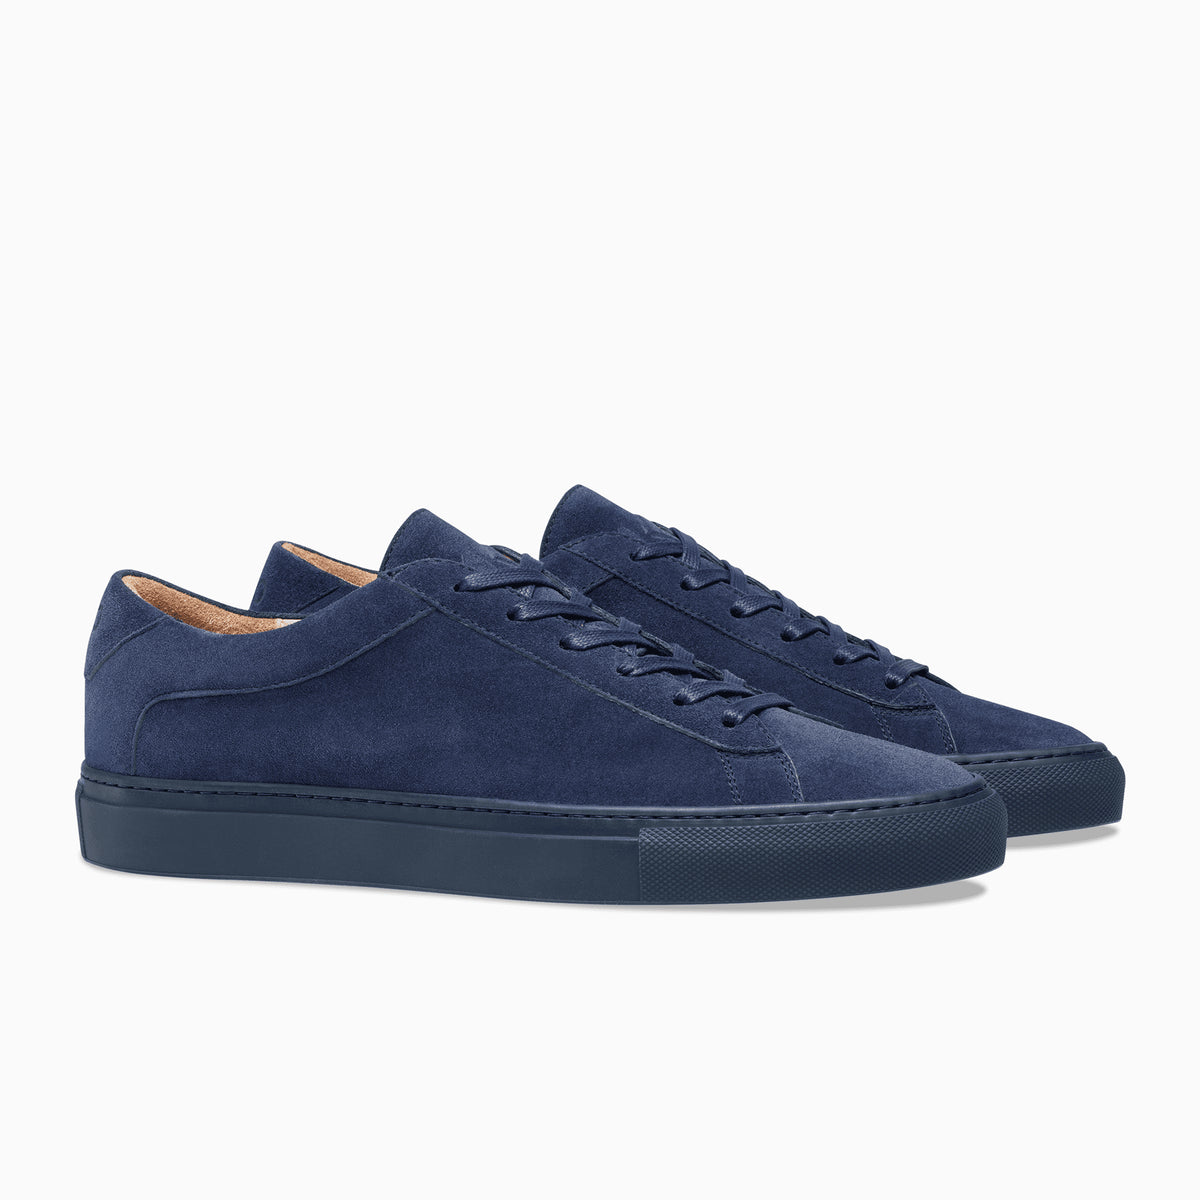 navy blue suede shoes womens